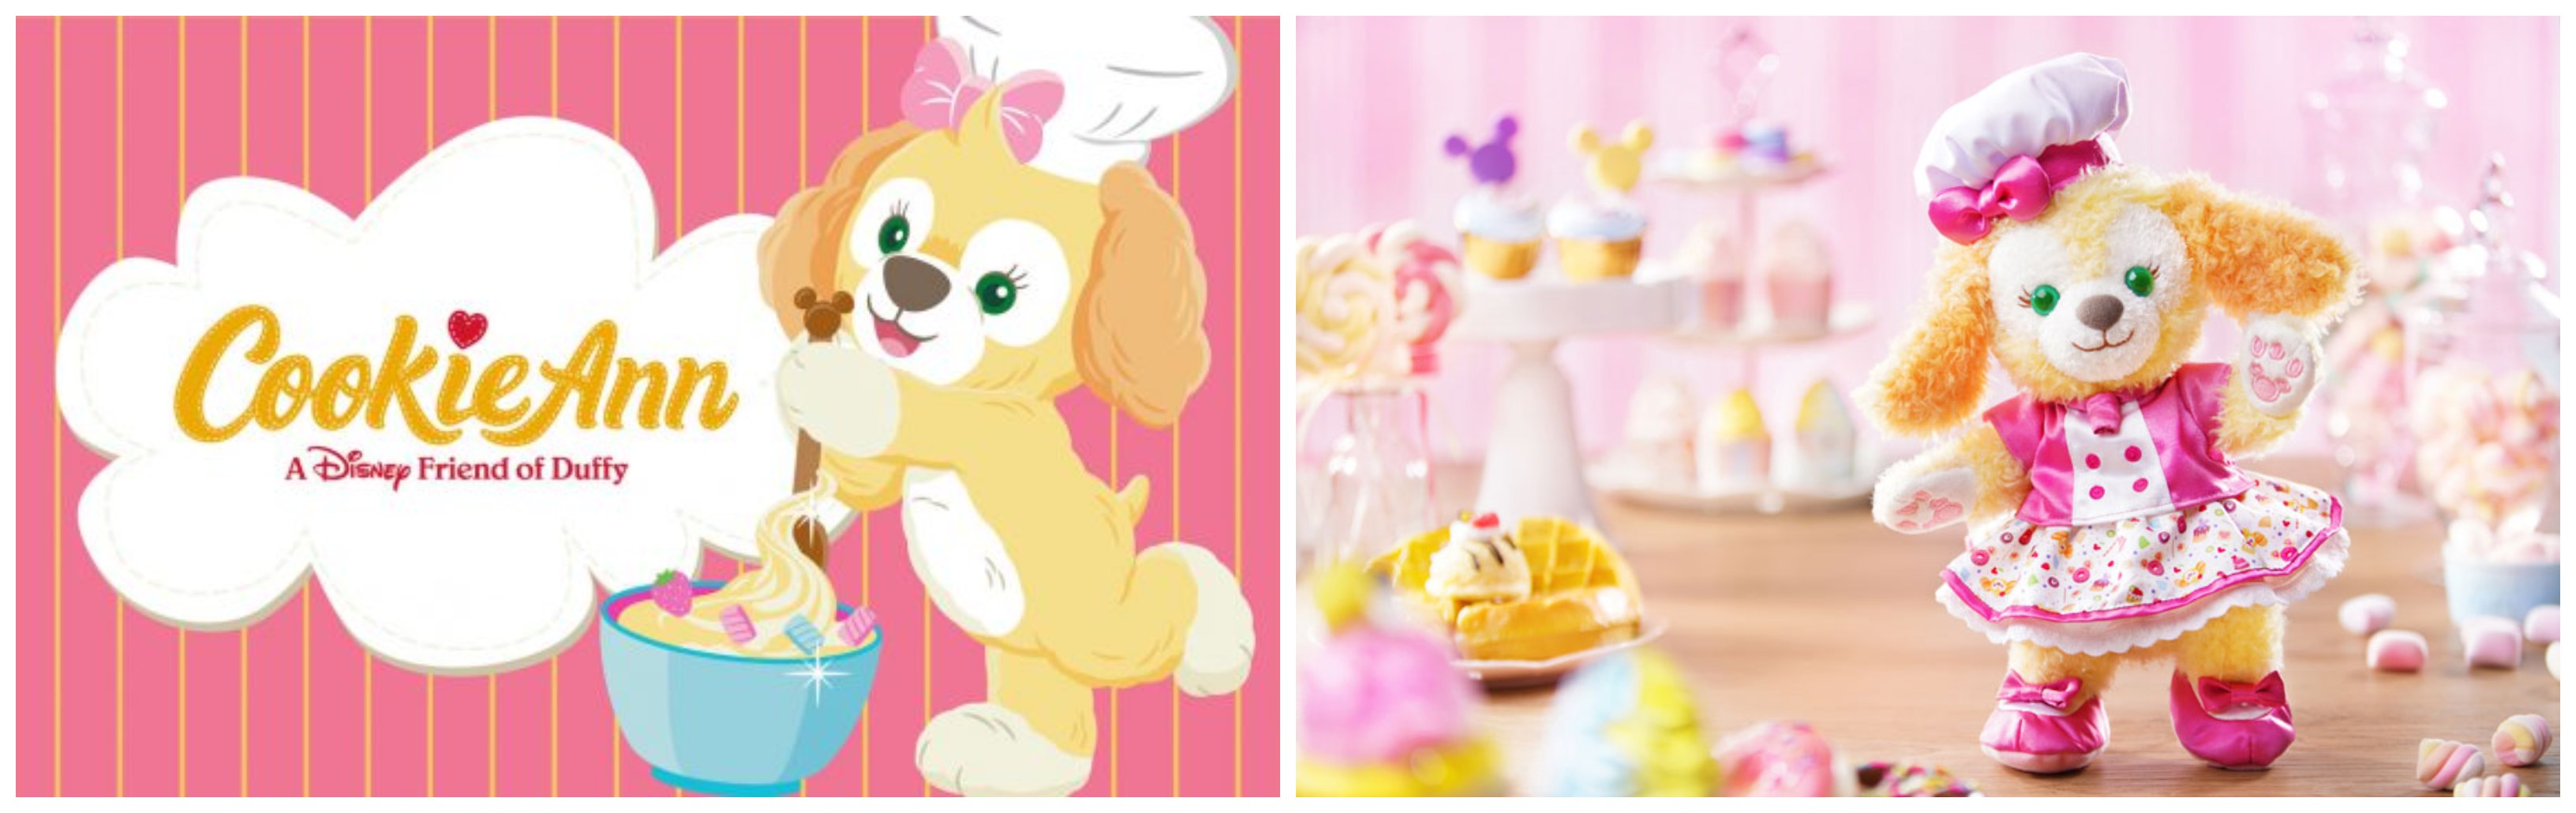 CookieAnn Joining Duffy and Friends at Tokyo Disneyland!